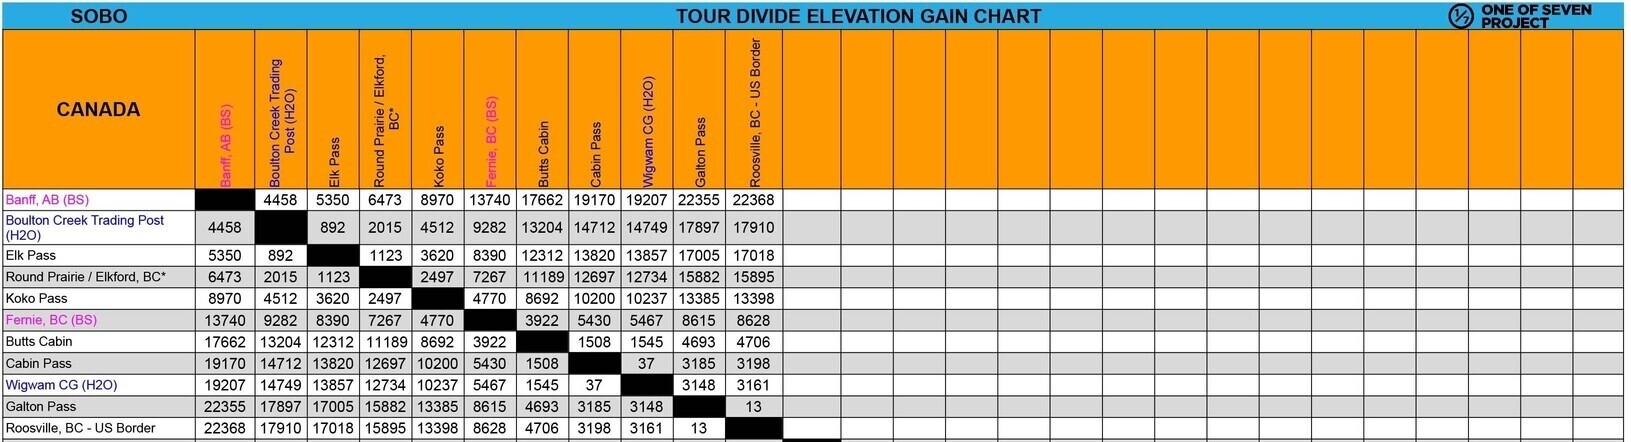 Tour Divide Elevation Gain Chart EXAMPLE bikepacking guide planning aids